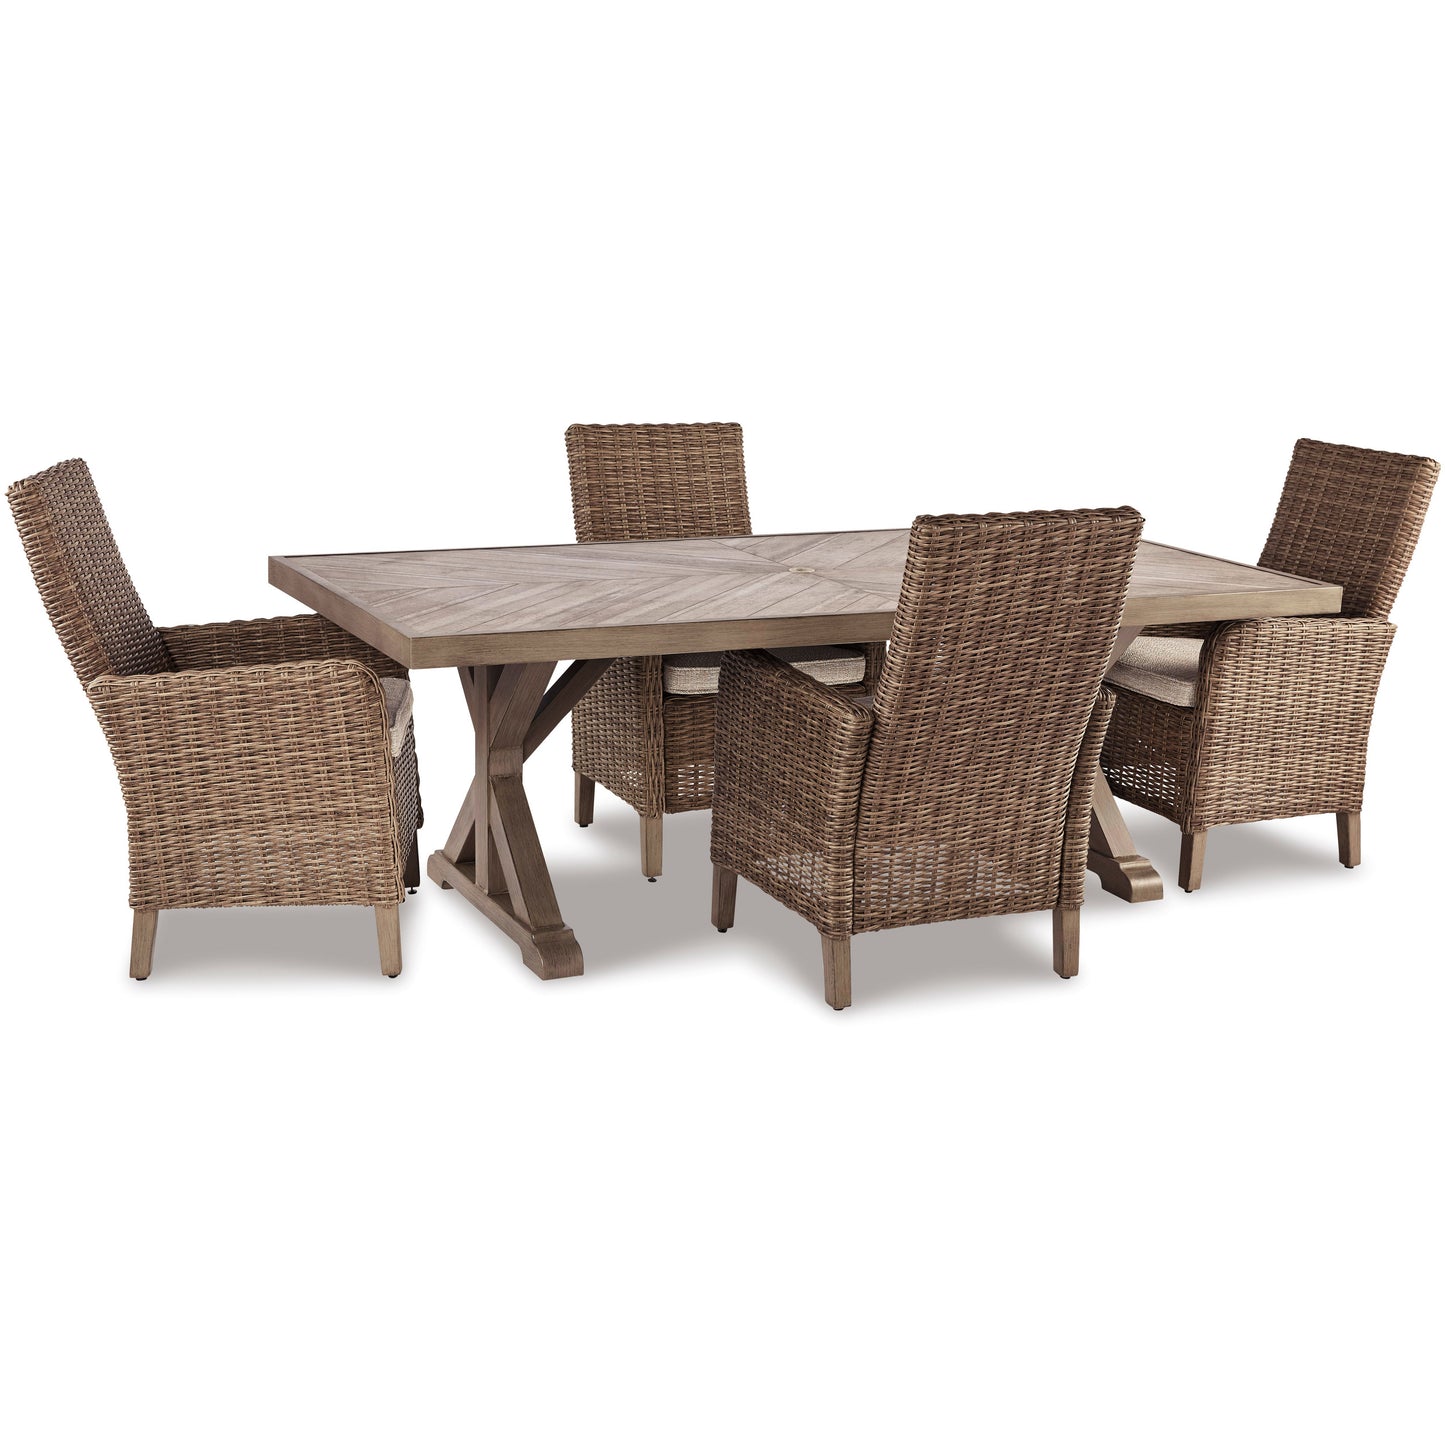 BEACHCROFT OUTDOOR DINING TABLE & 4 CHAIRS